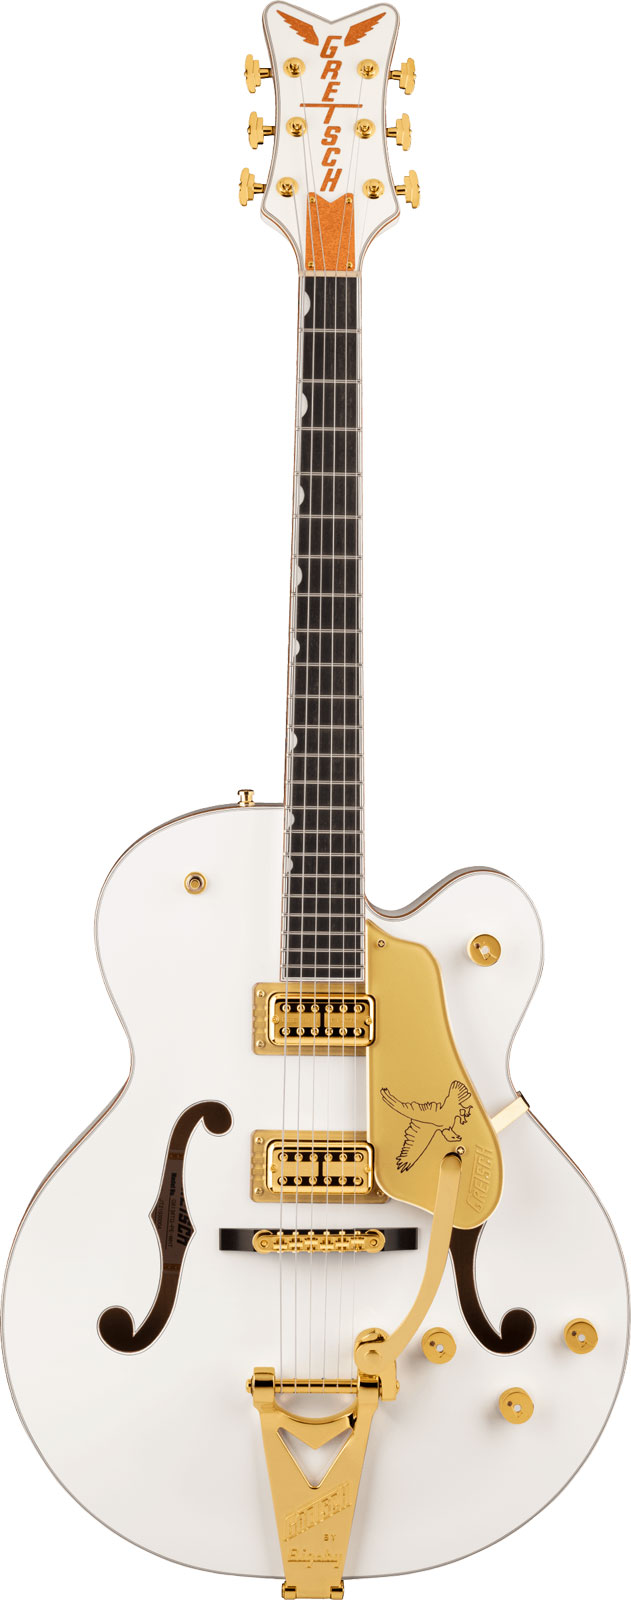 GRETSCH GUITARS G6136TG PLAYERS EDITION FALCON HOLLOW BODY WITH STRING-THRU BIGSBY AND GOLD HARDWARE EBO, WHITE